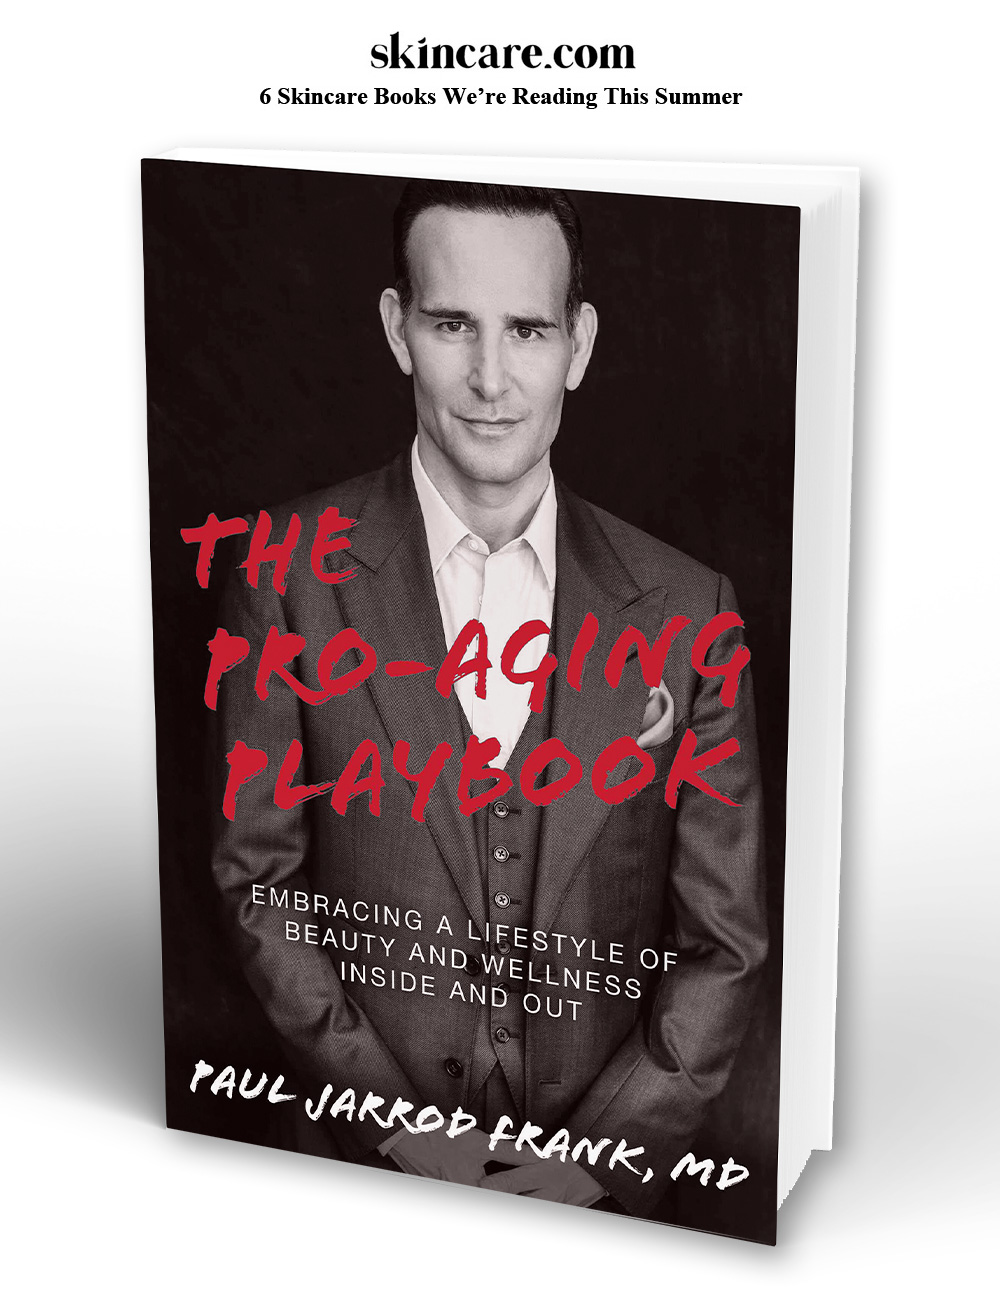 skincare.com featured The Pro-Aging Playbook by Dr. Paul Jarrod Frank of PFrankMD